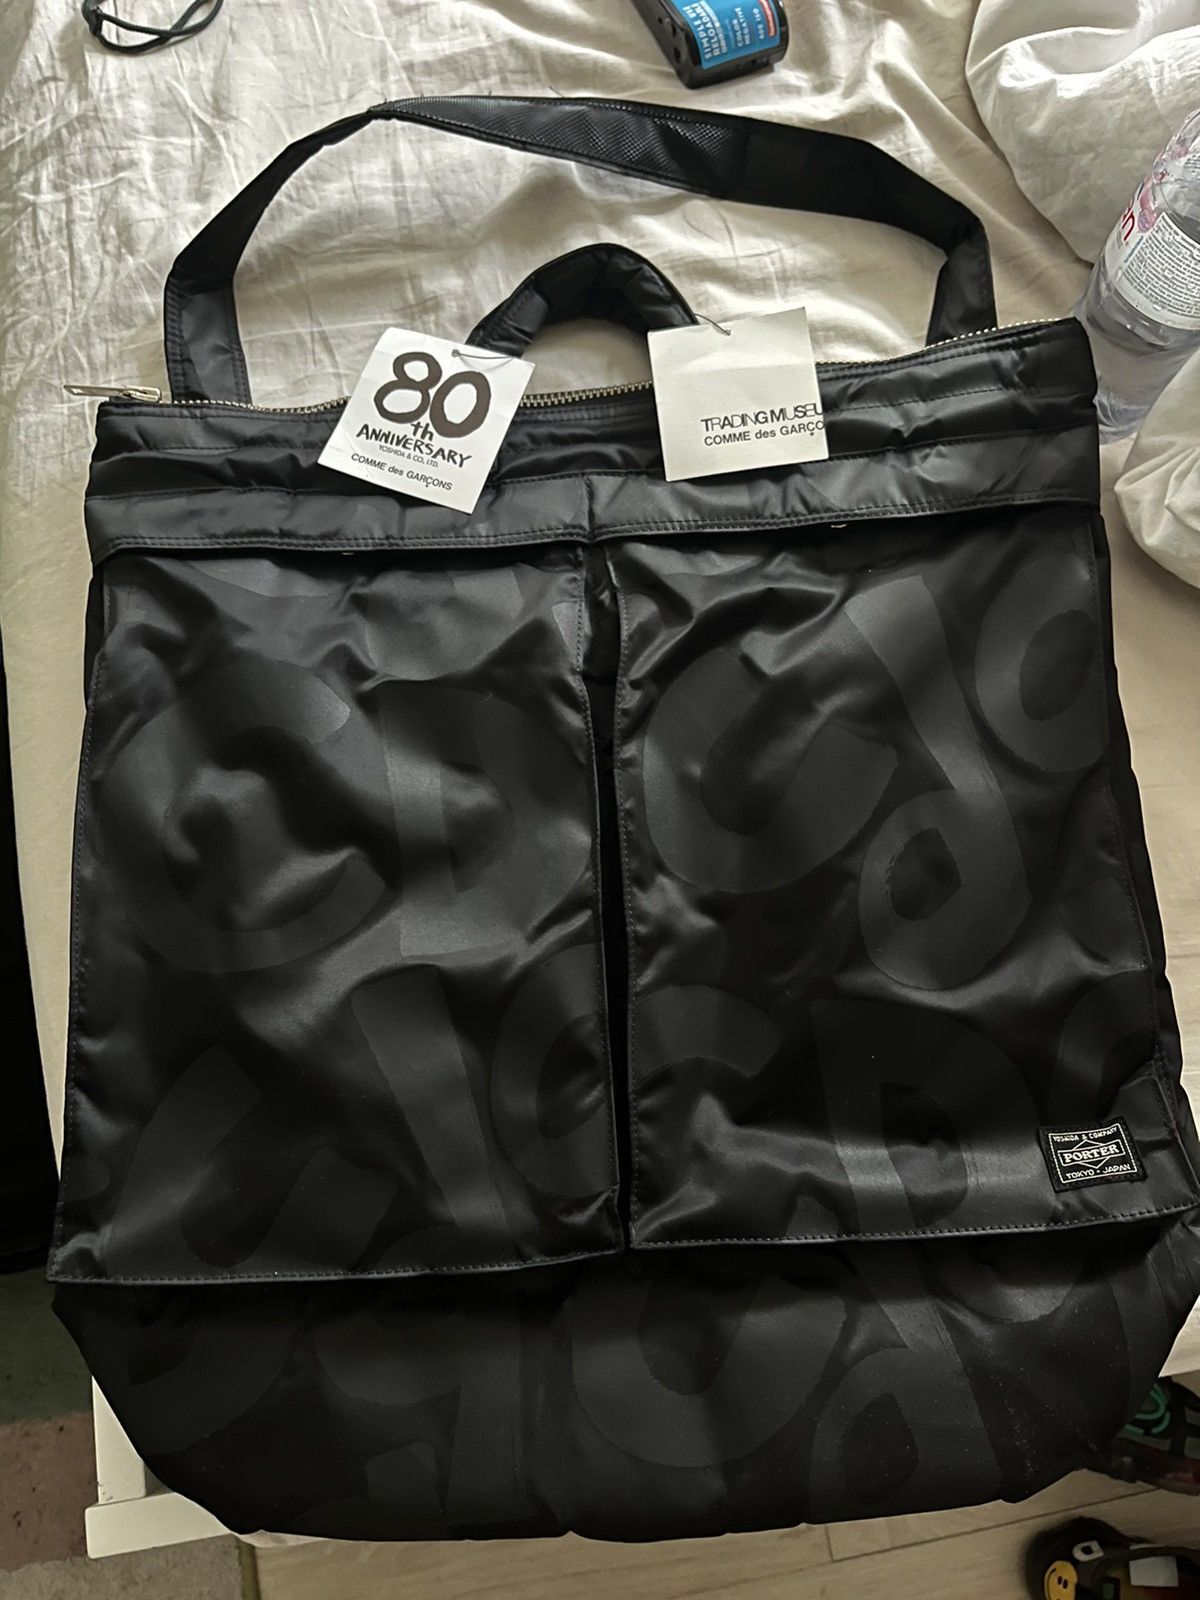 Comme des Garcons CDG x Porter 80th anniversary | Grailed